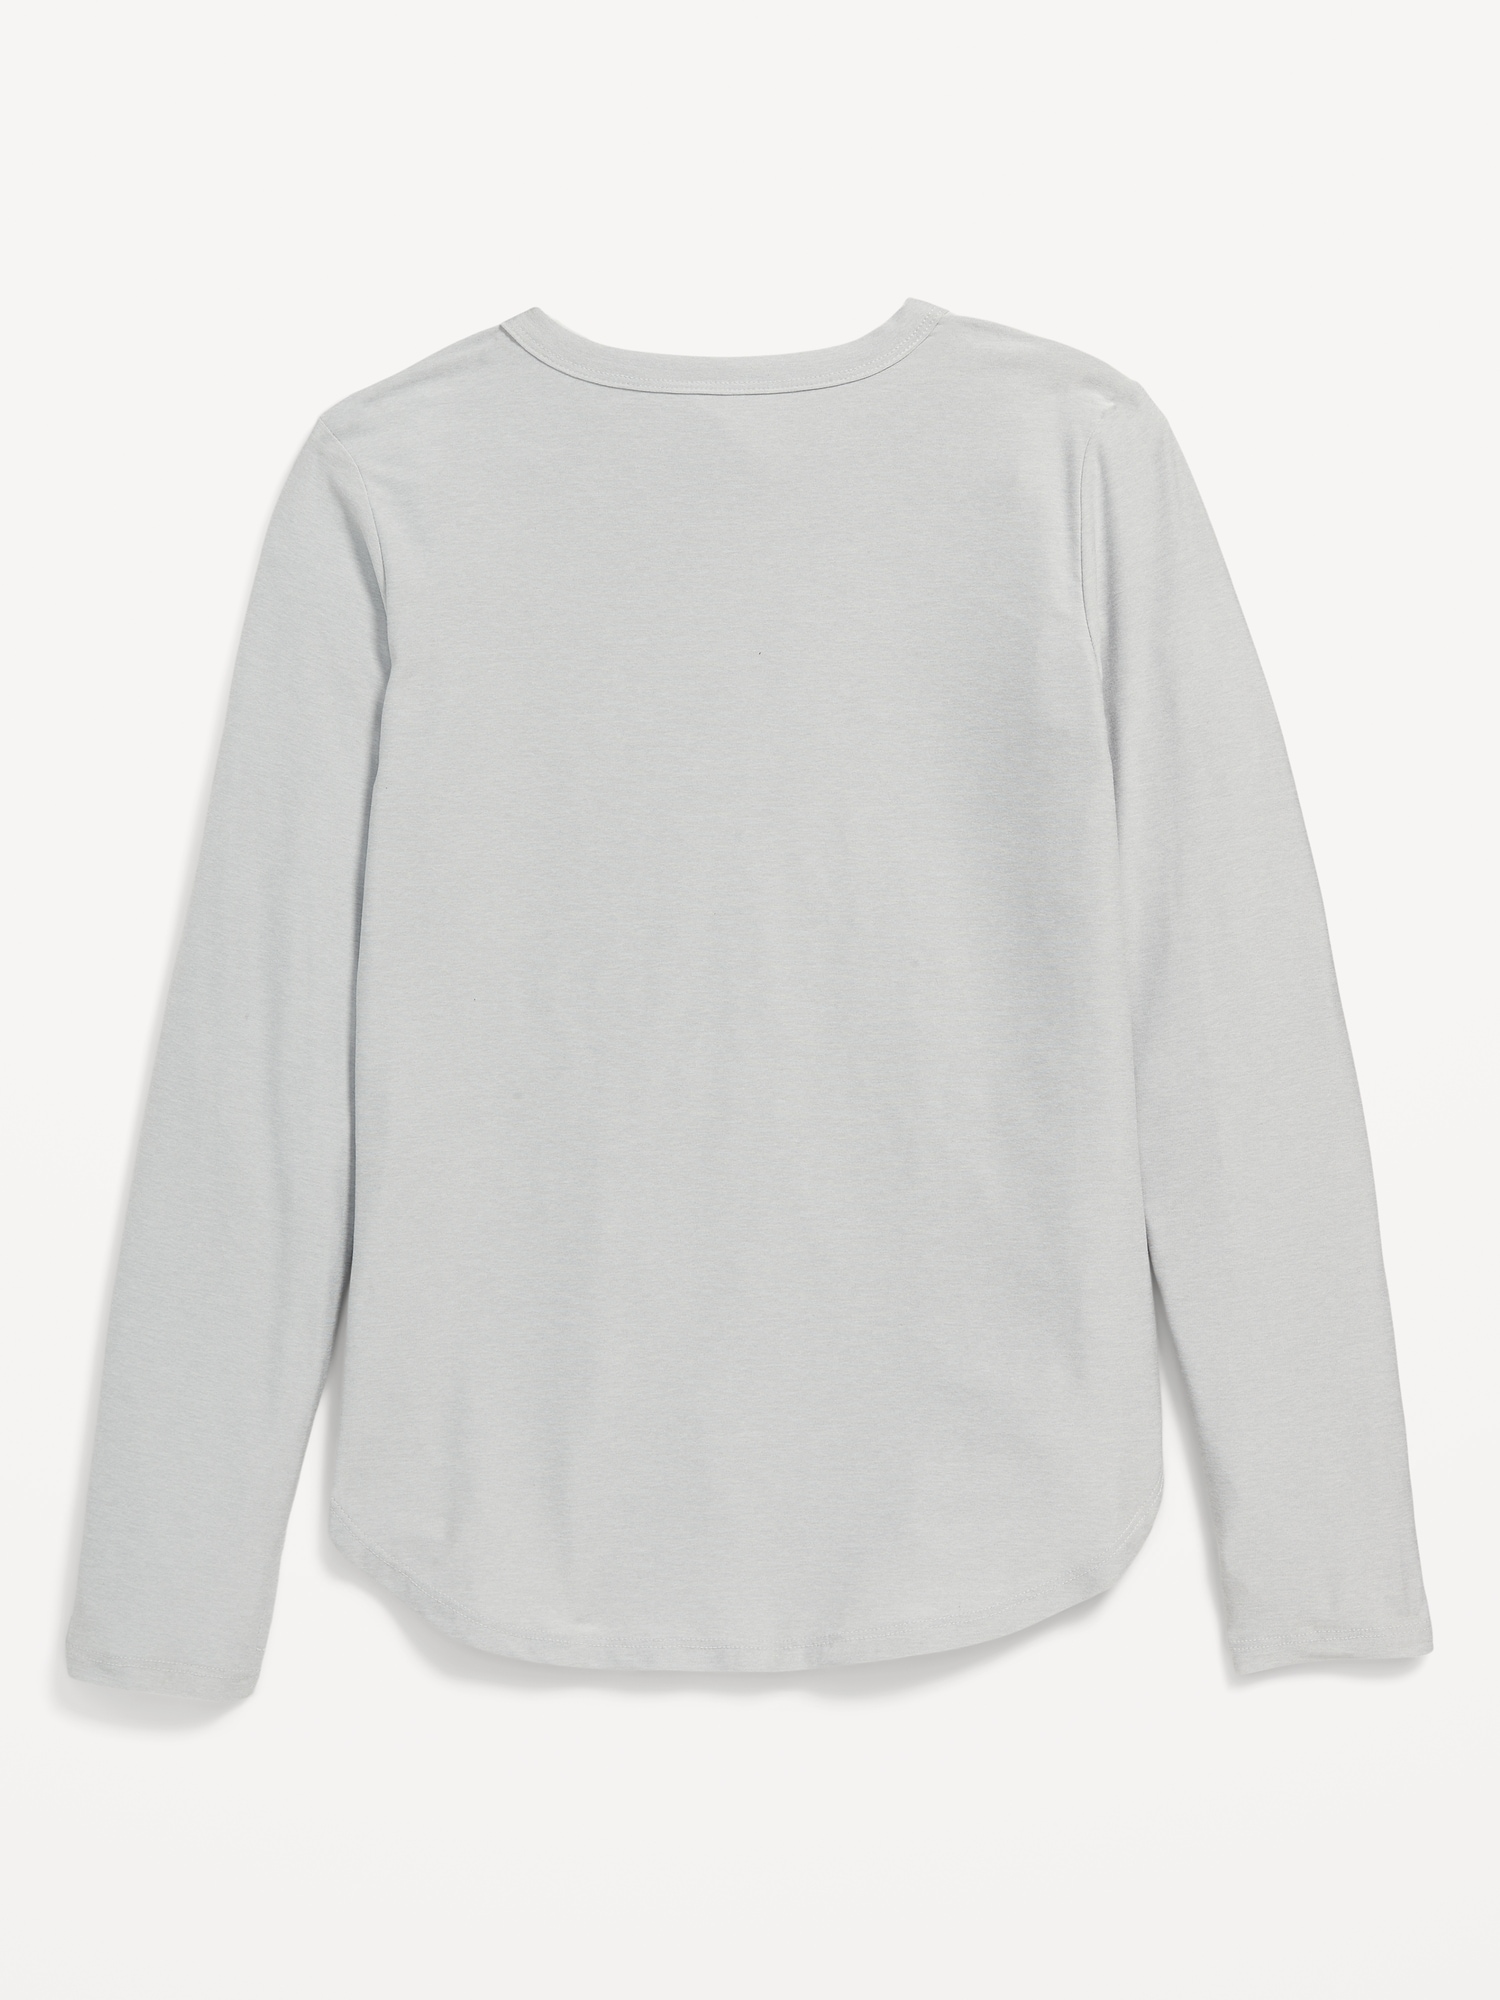 Cloud 94 Soft Go-Dry Long-Sleeve T-Shirt for Girls | Old Navy